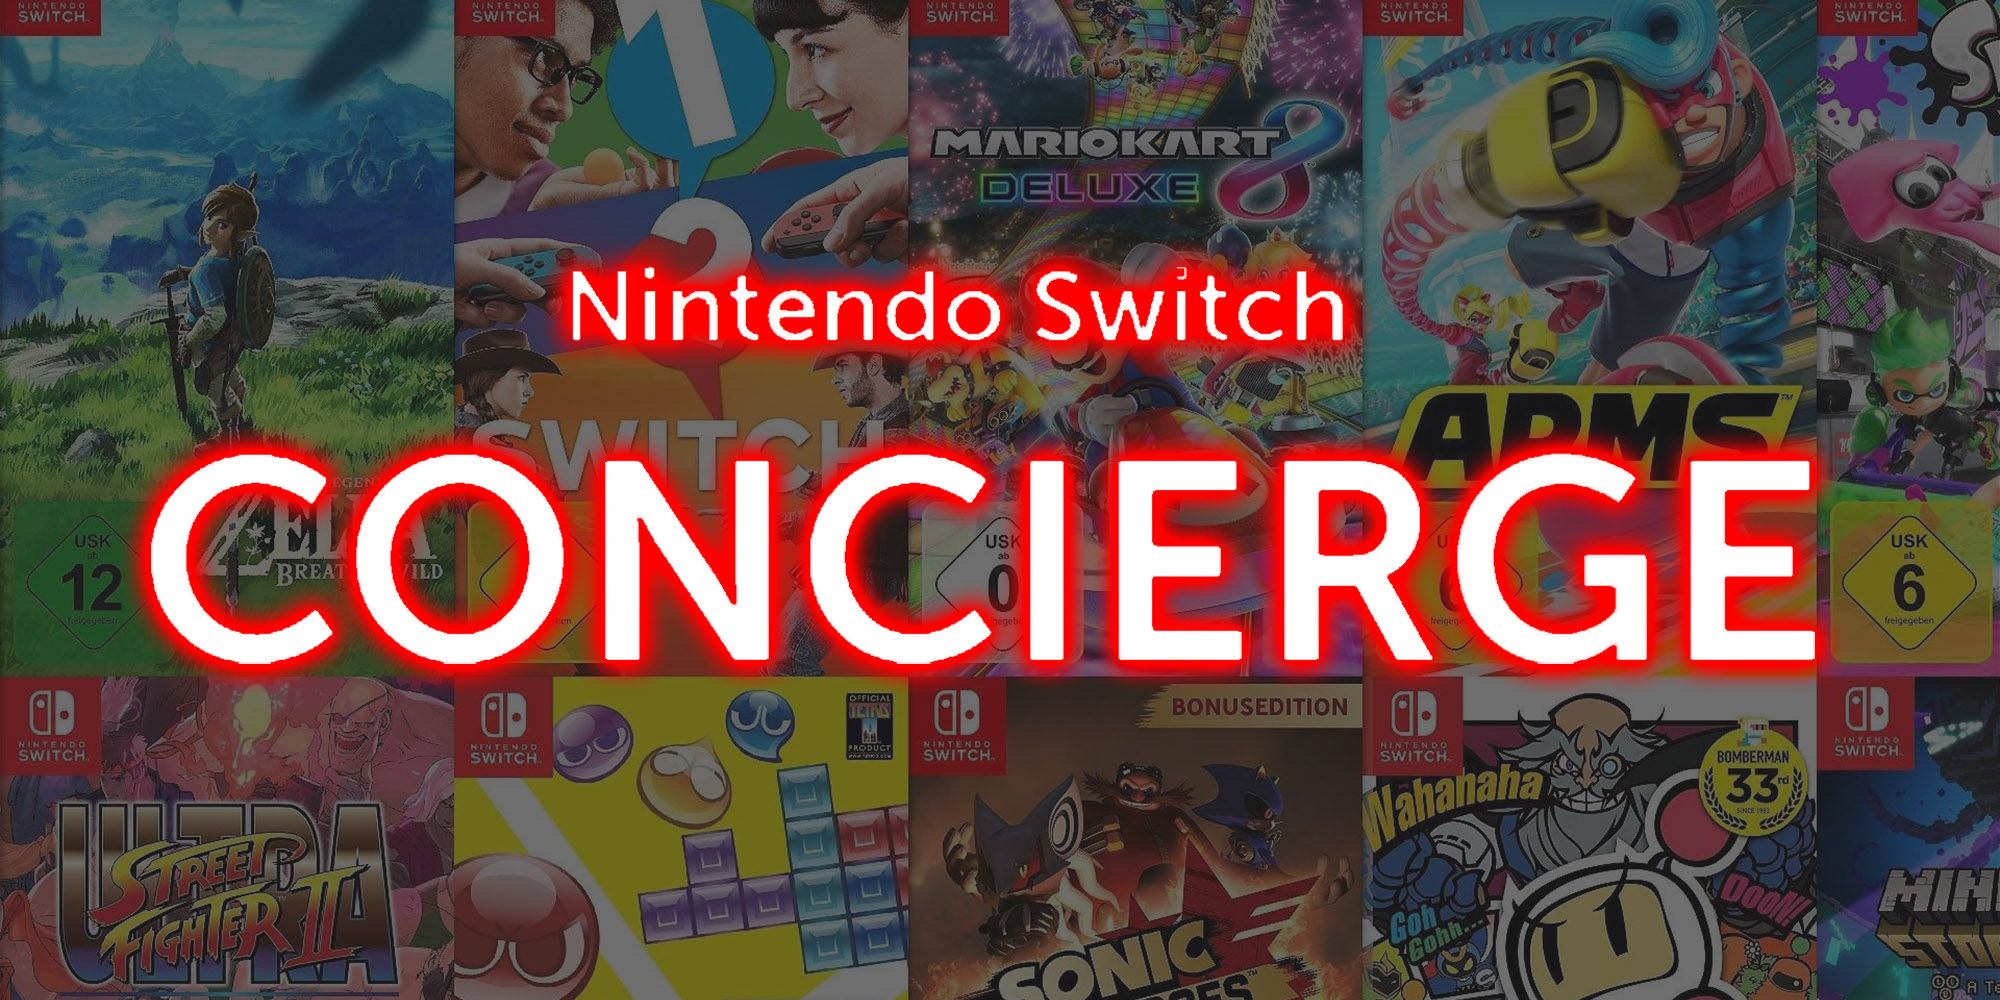 Nintendo’s Switch Concierge concept should be on all platforms